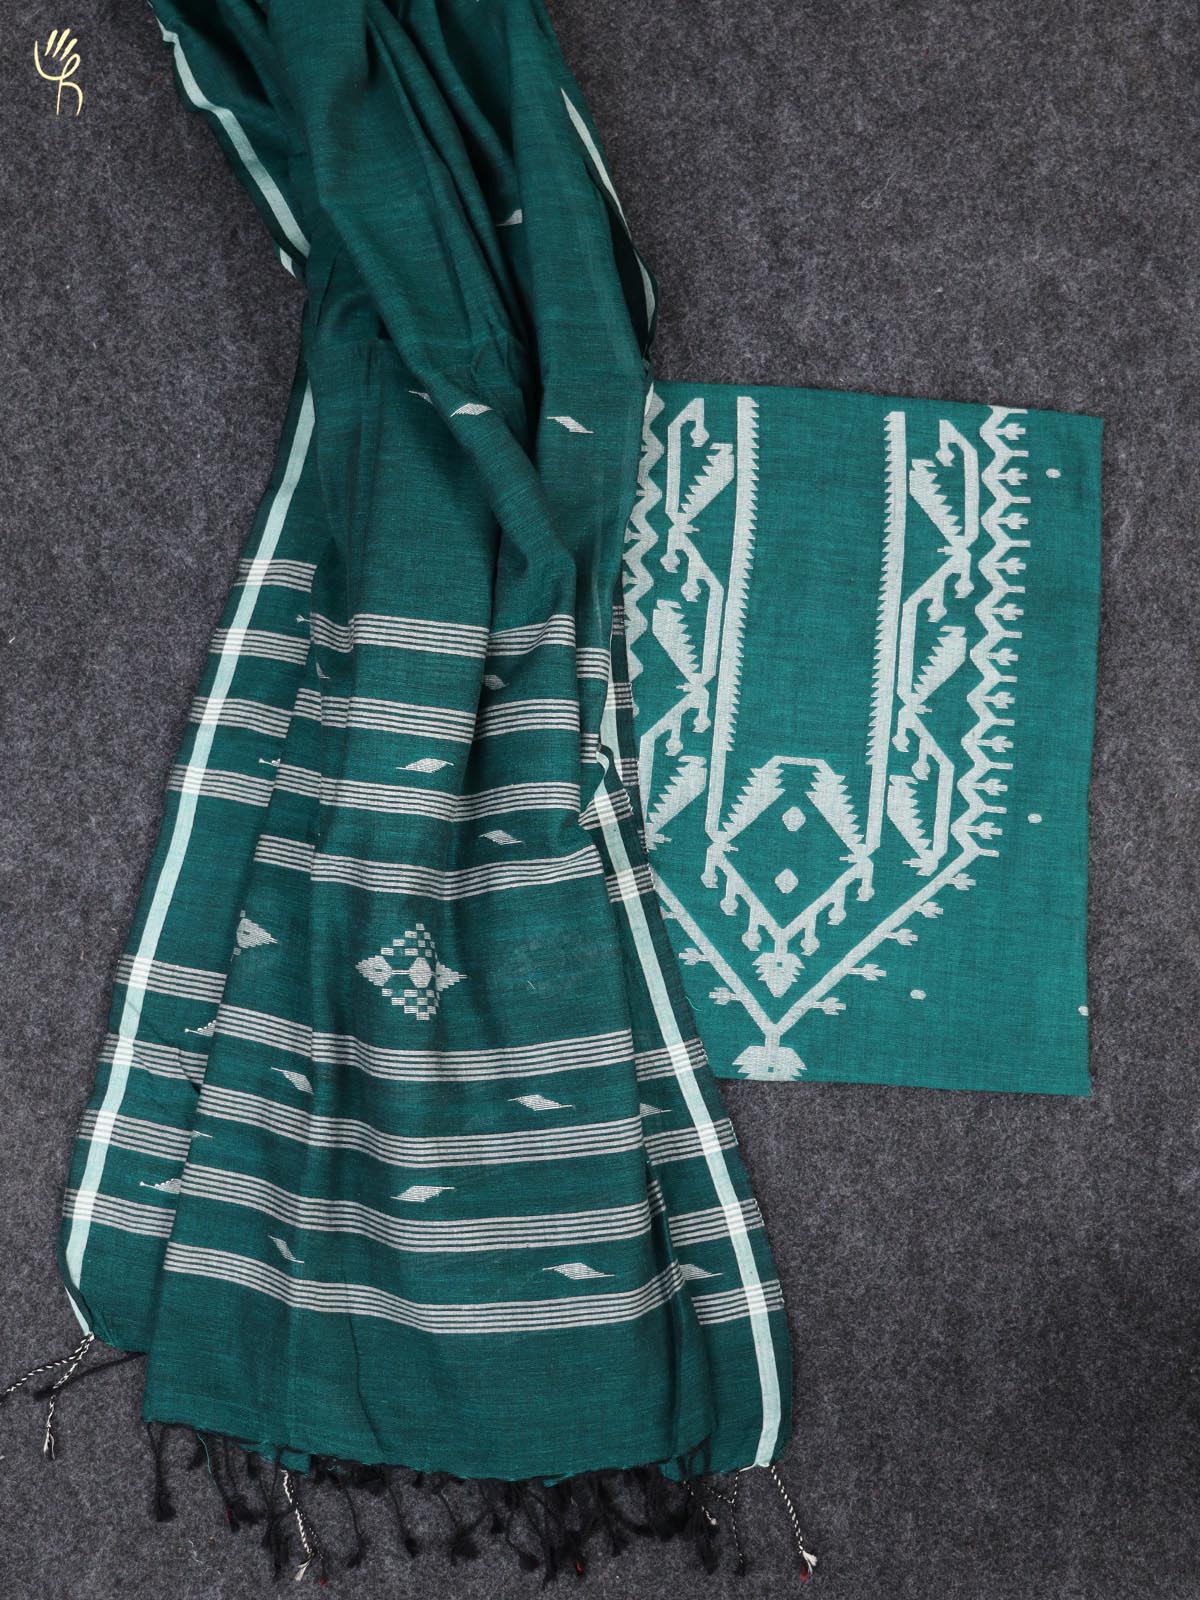 Buy Handloom Cotton Dress Material Online at Best Prices in India - JioMart.